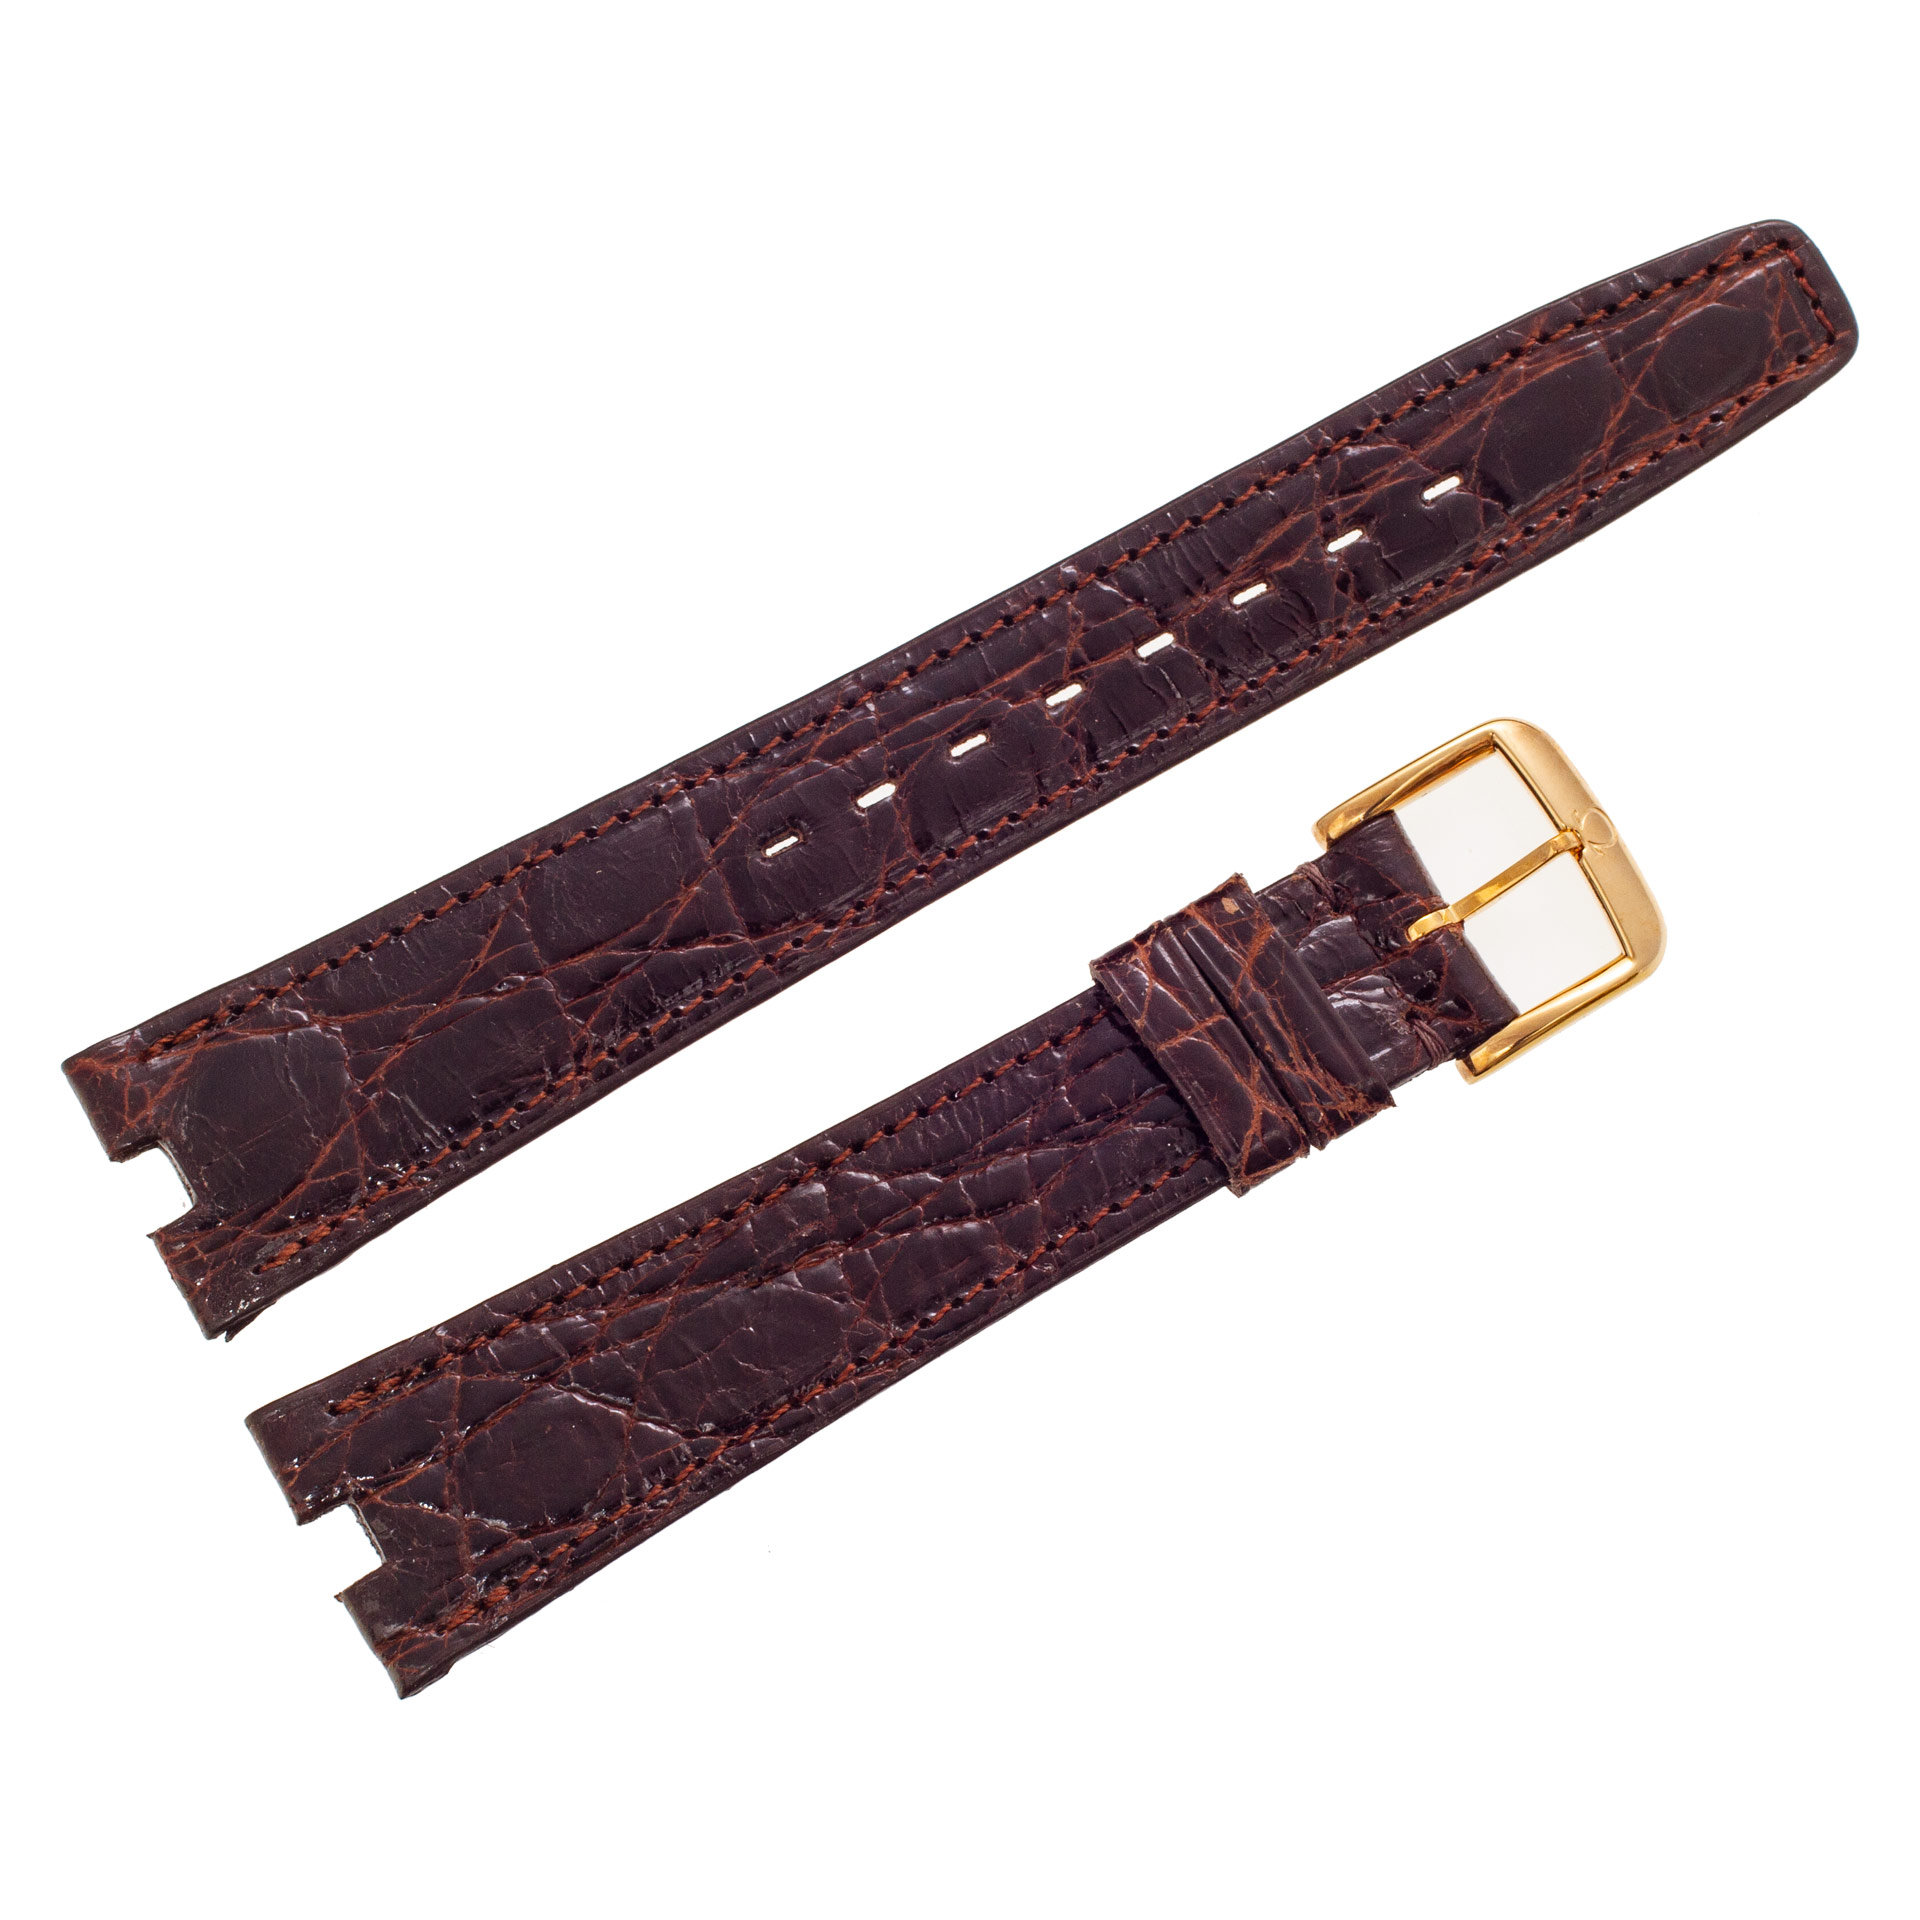 Omega brown crocodile strap with original buckle at 19mm x 15mm